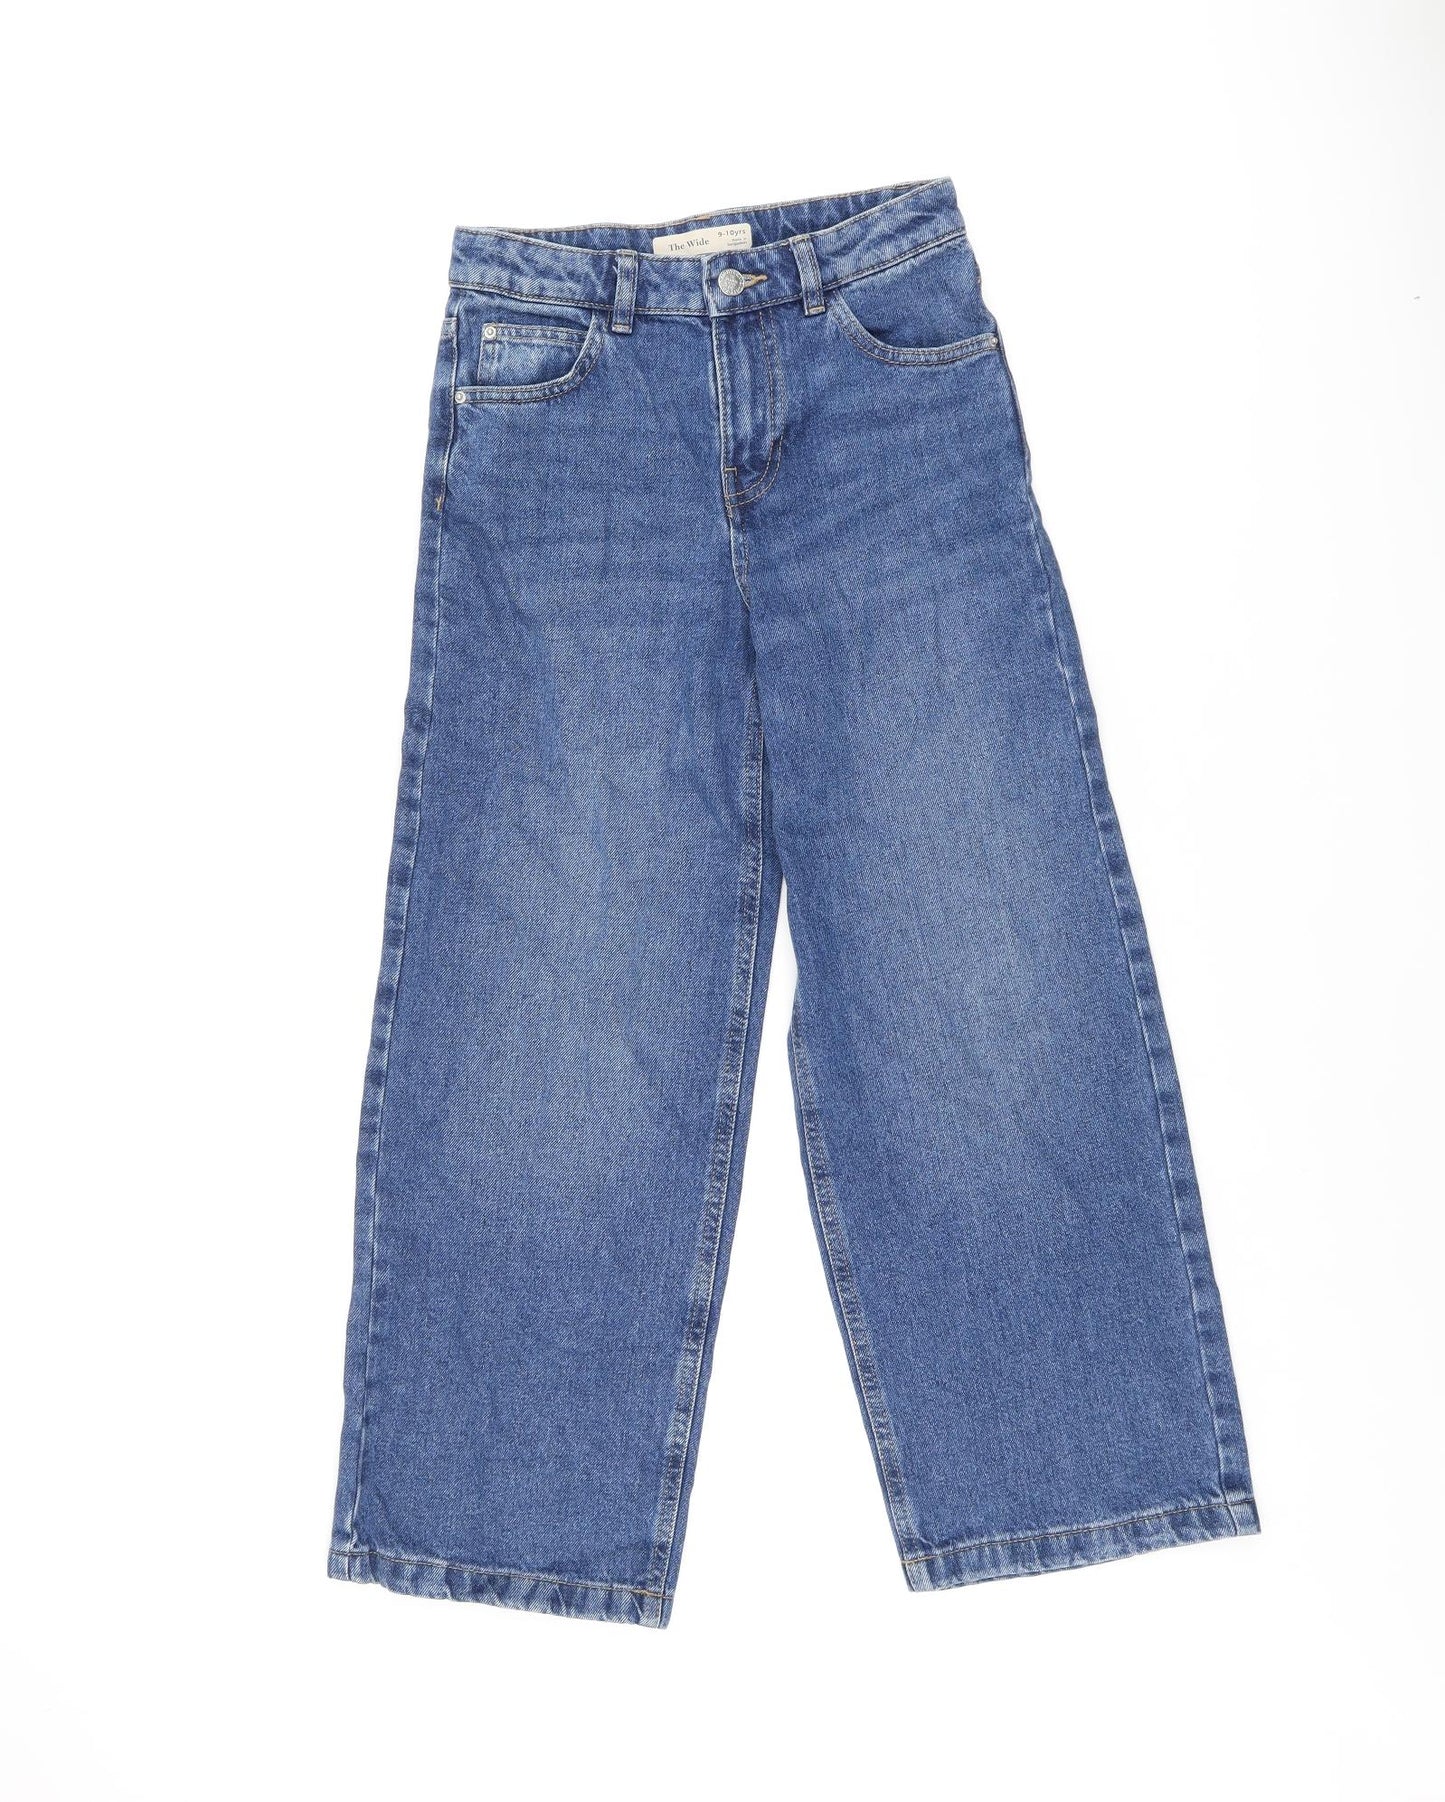 Marks and Spencer Girls Blue 100% Cotton Wide-Leg Jeans Size 9-10 Years L23 in Regular Zip